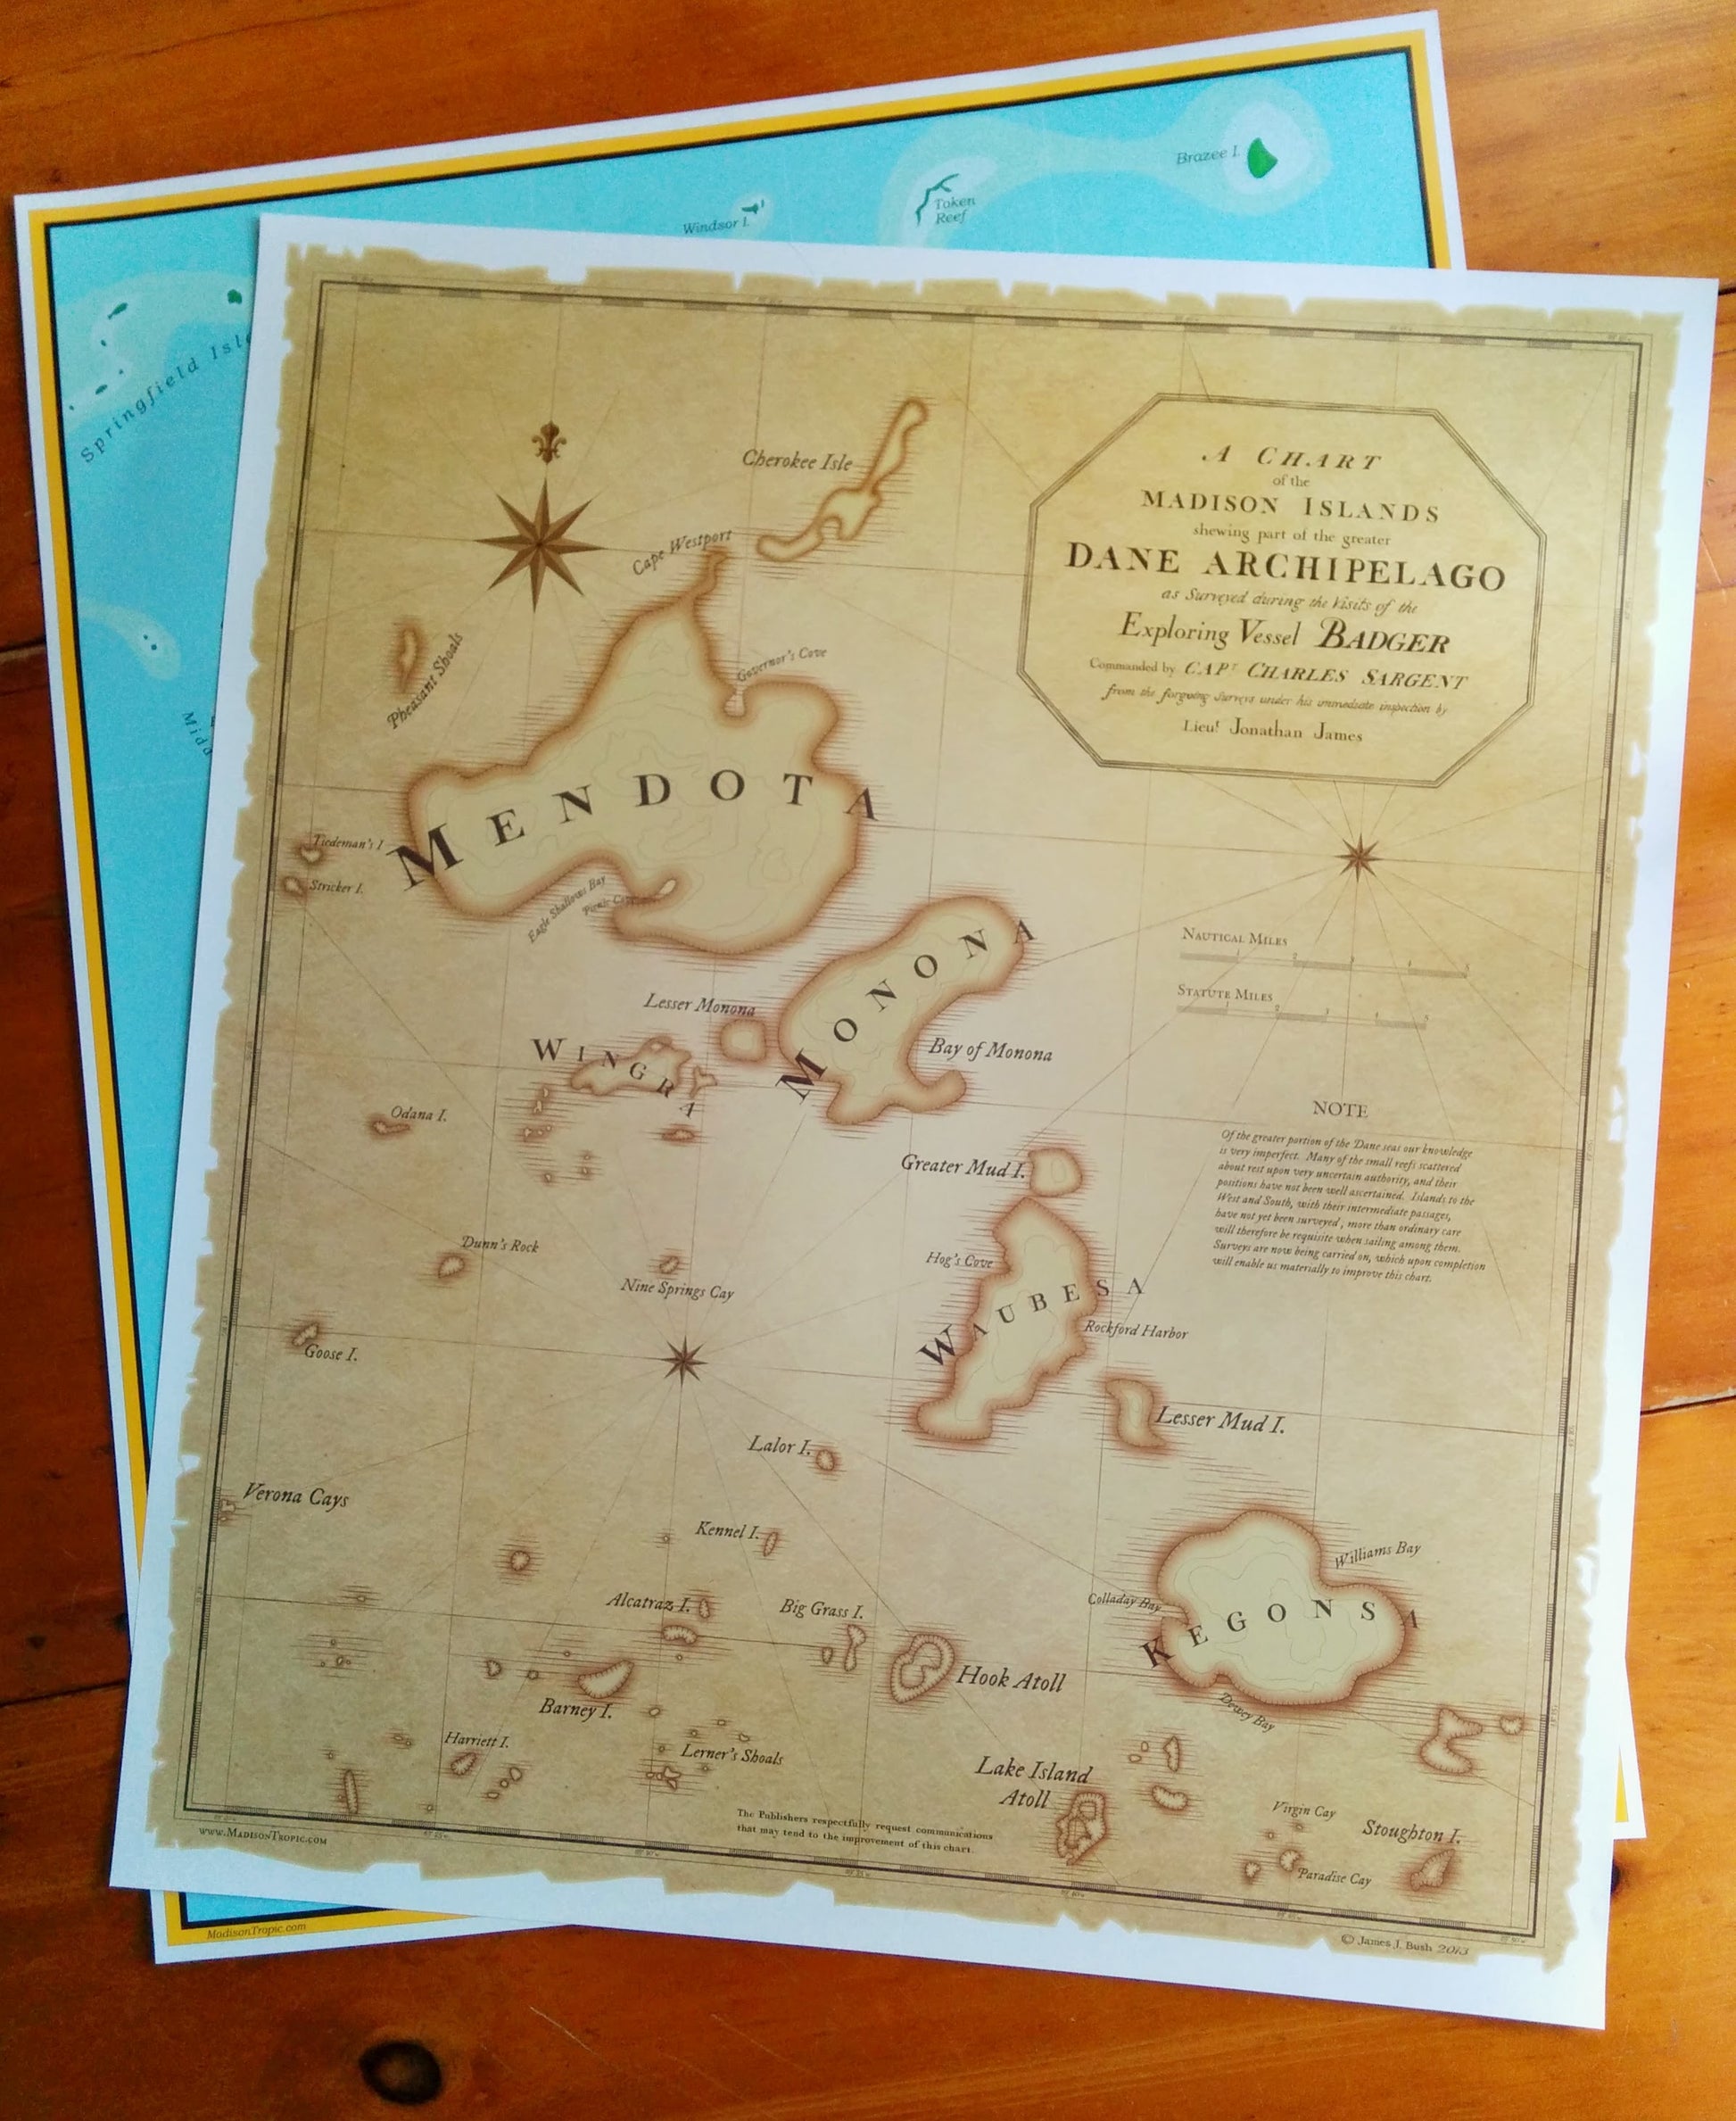 A Chart of the Madison Islands and Greater Dane Archipelago - The Mad Tropic